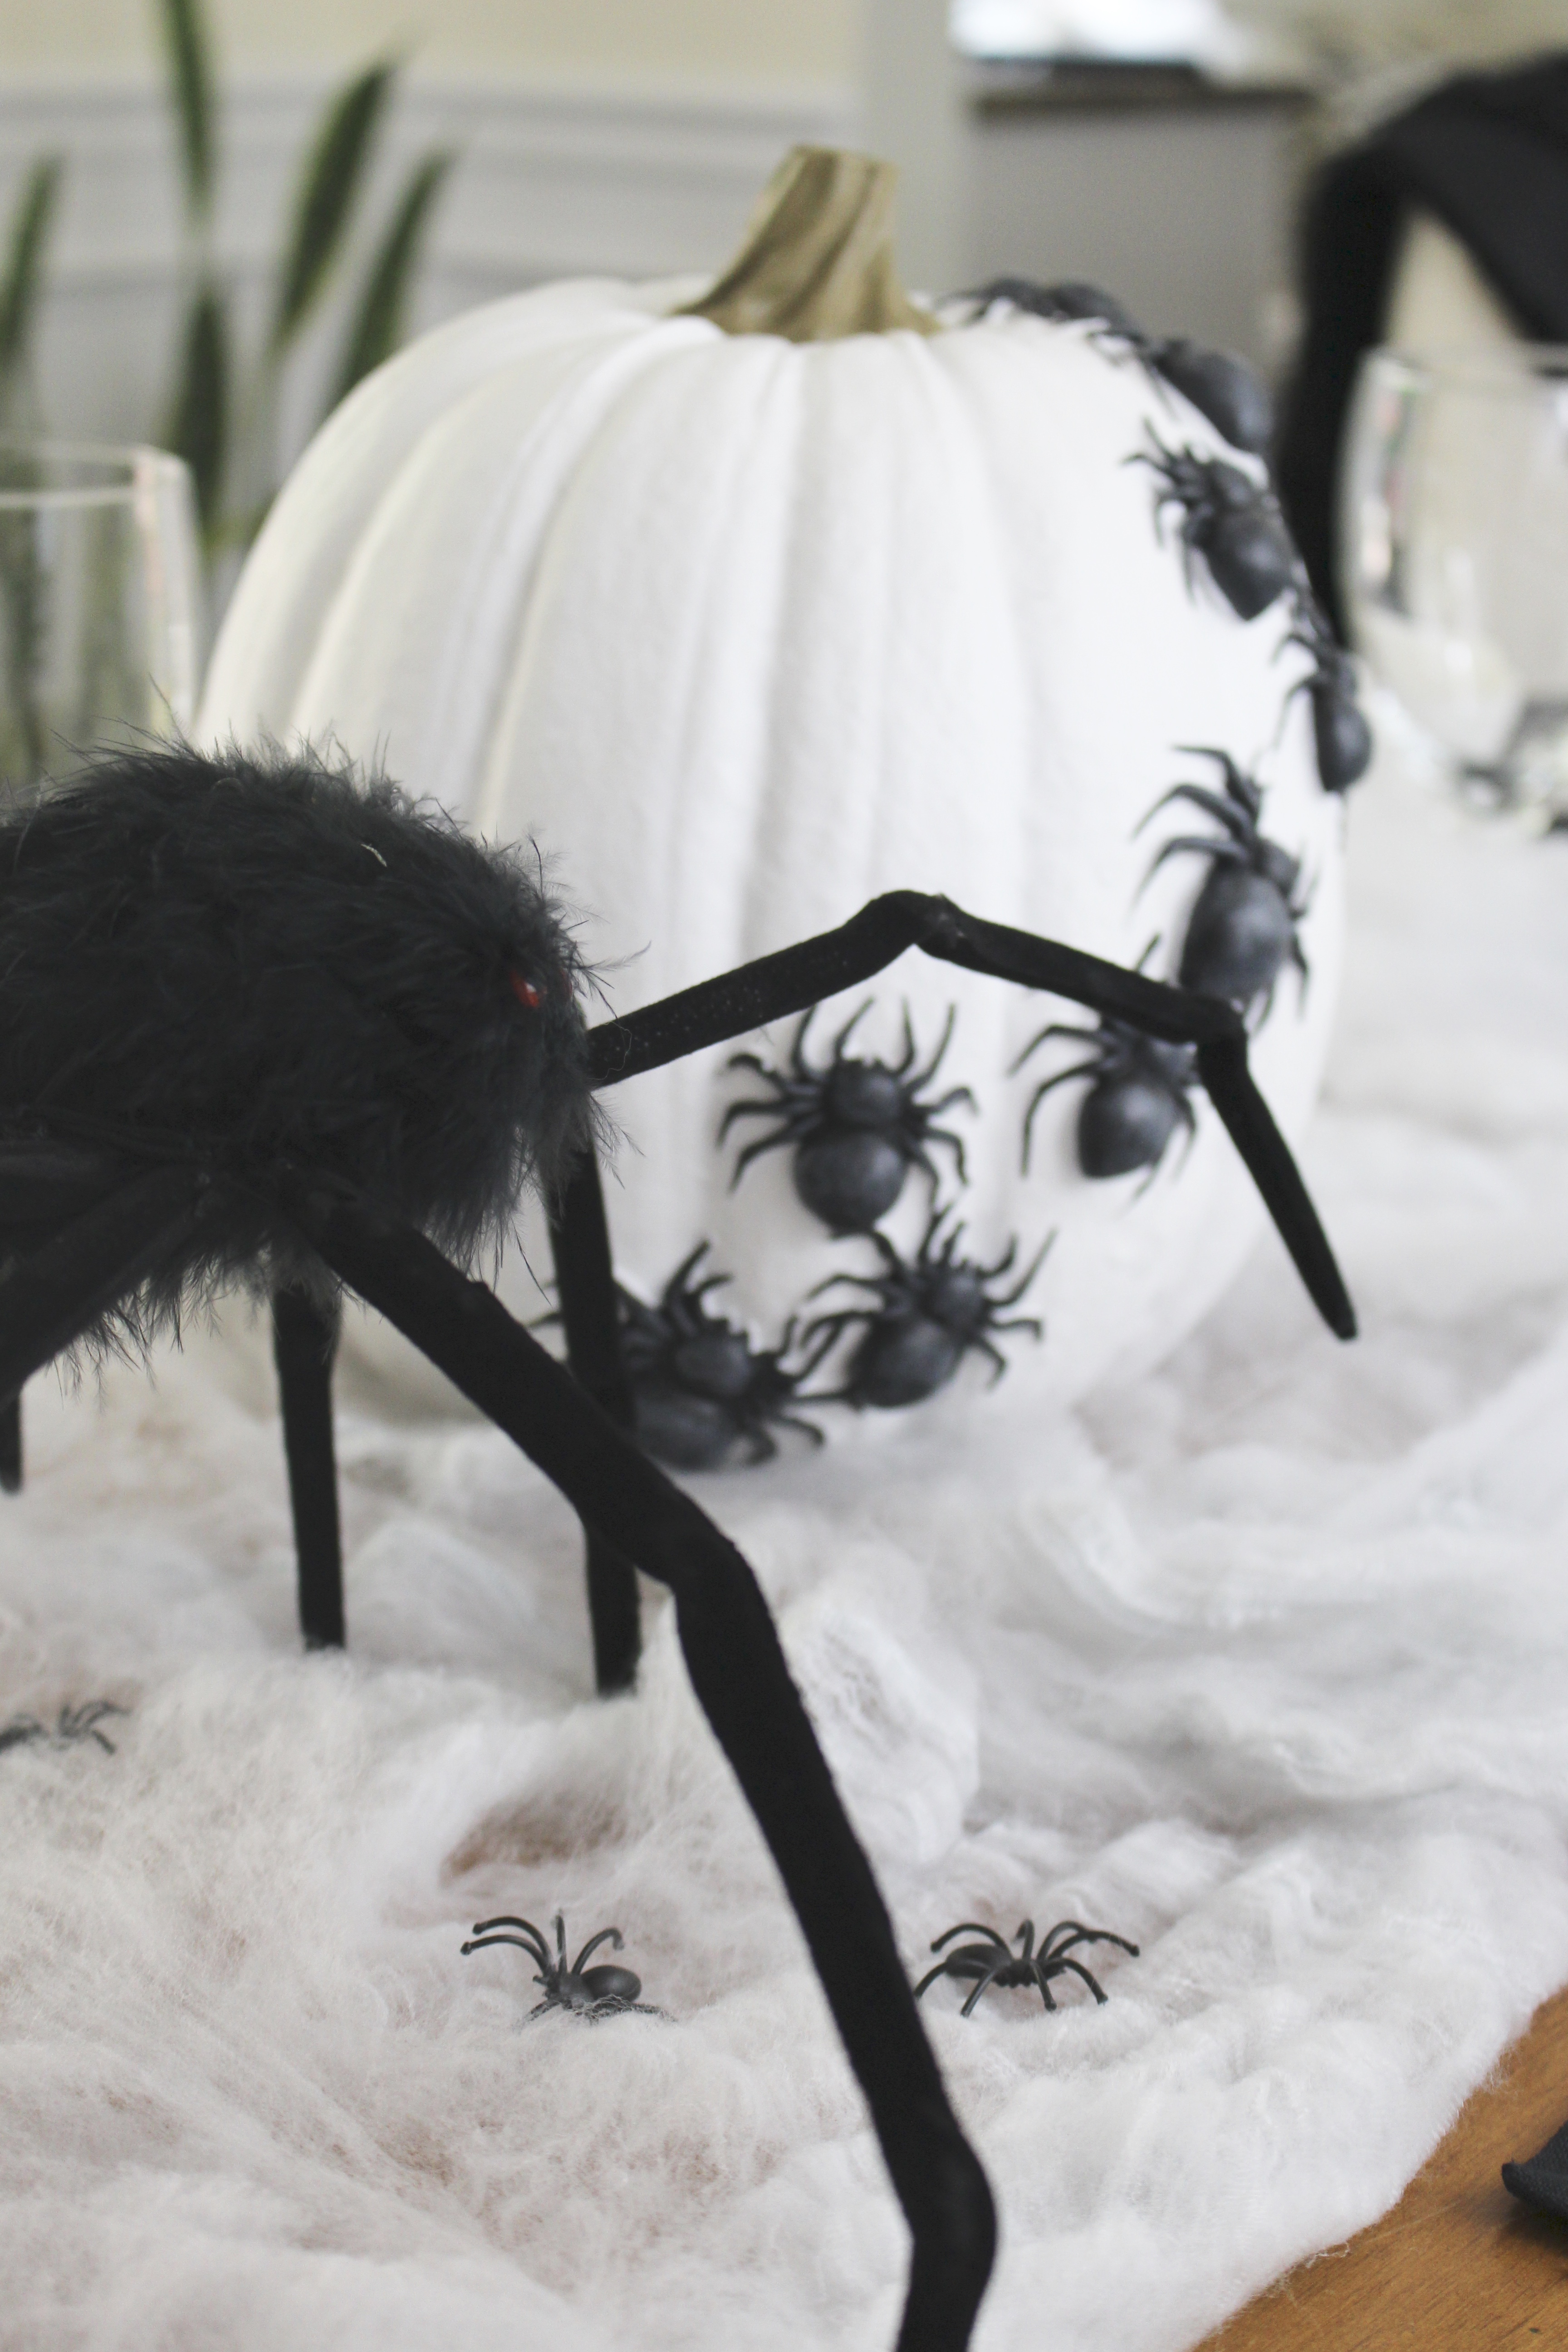 Halloween dining tablescape- At Home- Halloween- table decor- seasonal decorating- black and white Halloween decor- decorating for Halloween